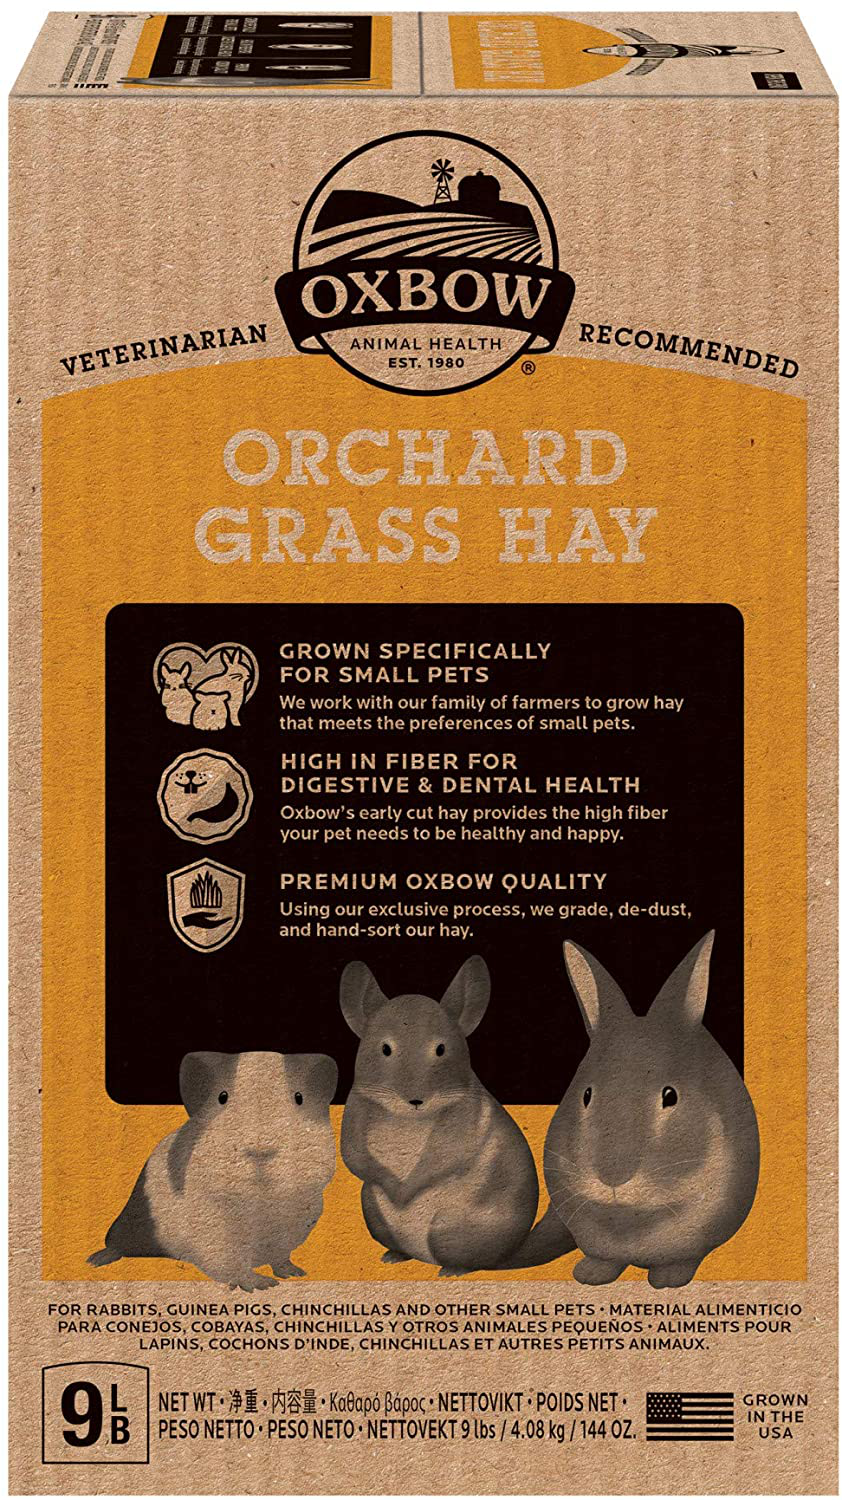 Oxbow Animal Health Orchard Grass Hay - All Natural Grass Hay for Chinchillas, Rabbits, Guinea Pigs, Hamsters & Gerbils